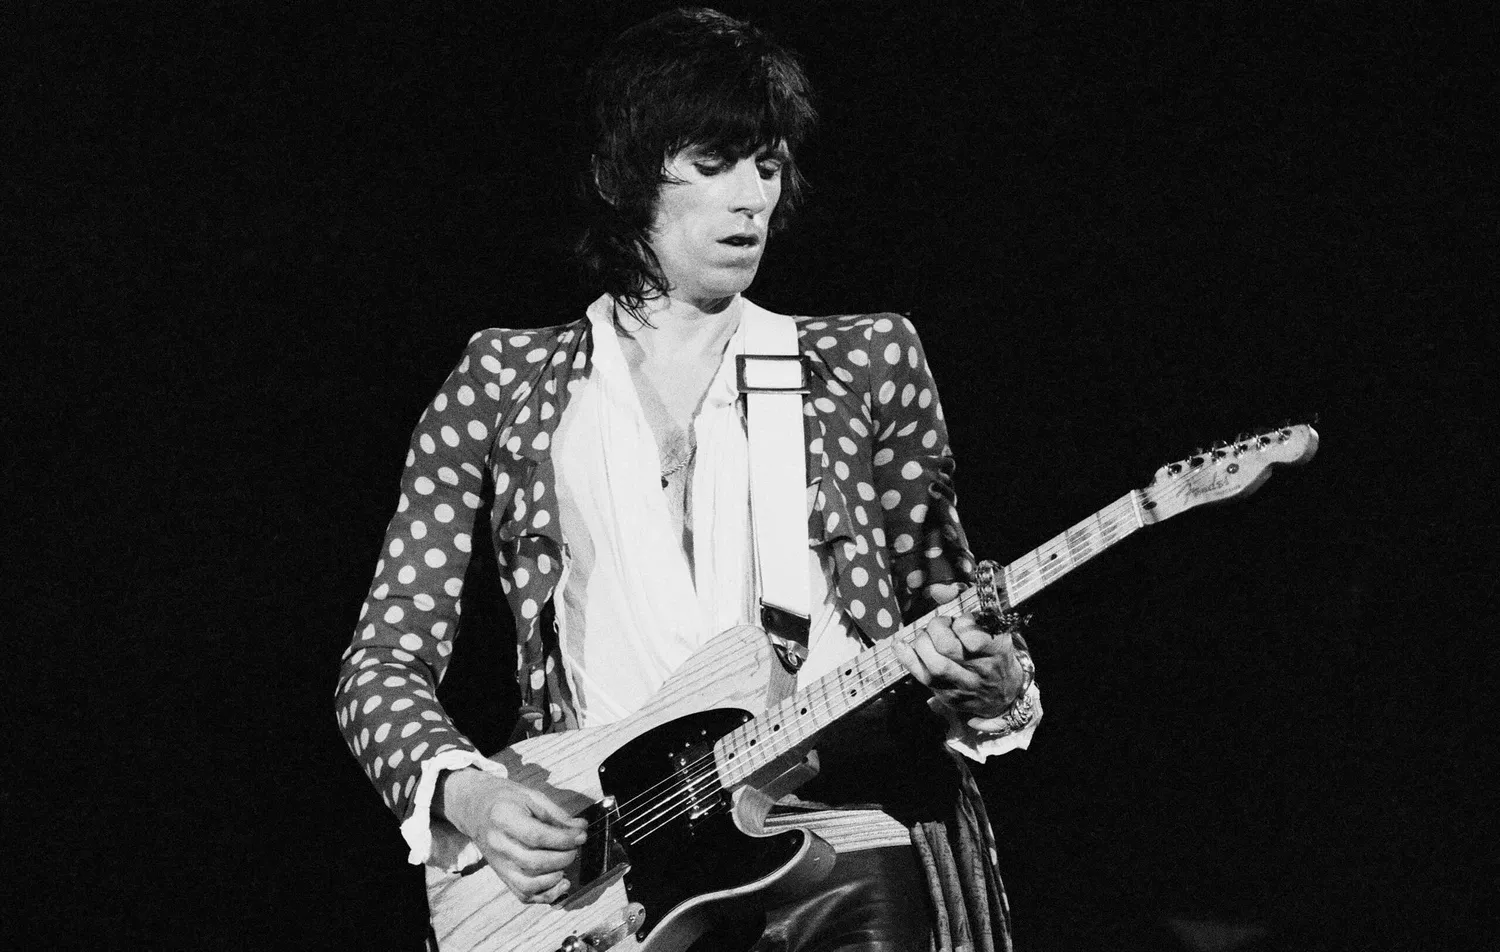 Keith Richards playing the guitar on stage